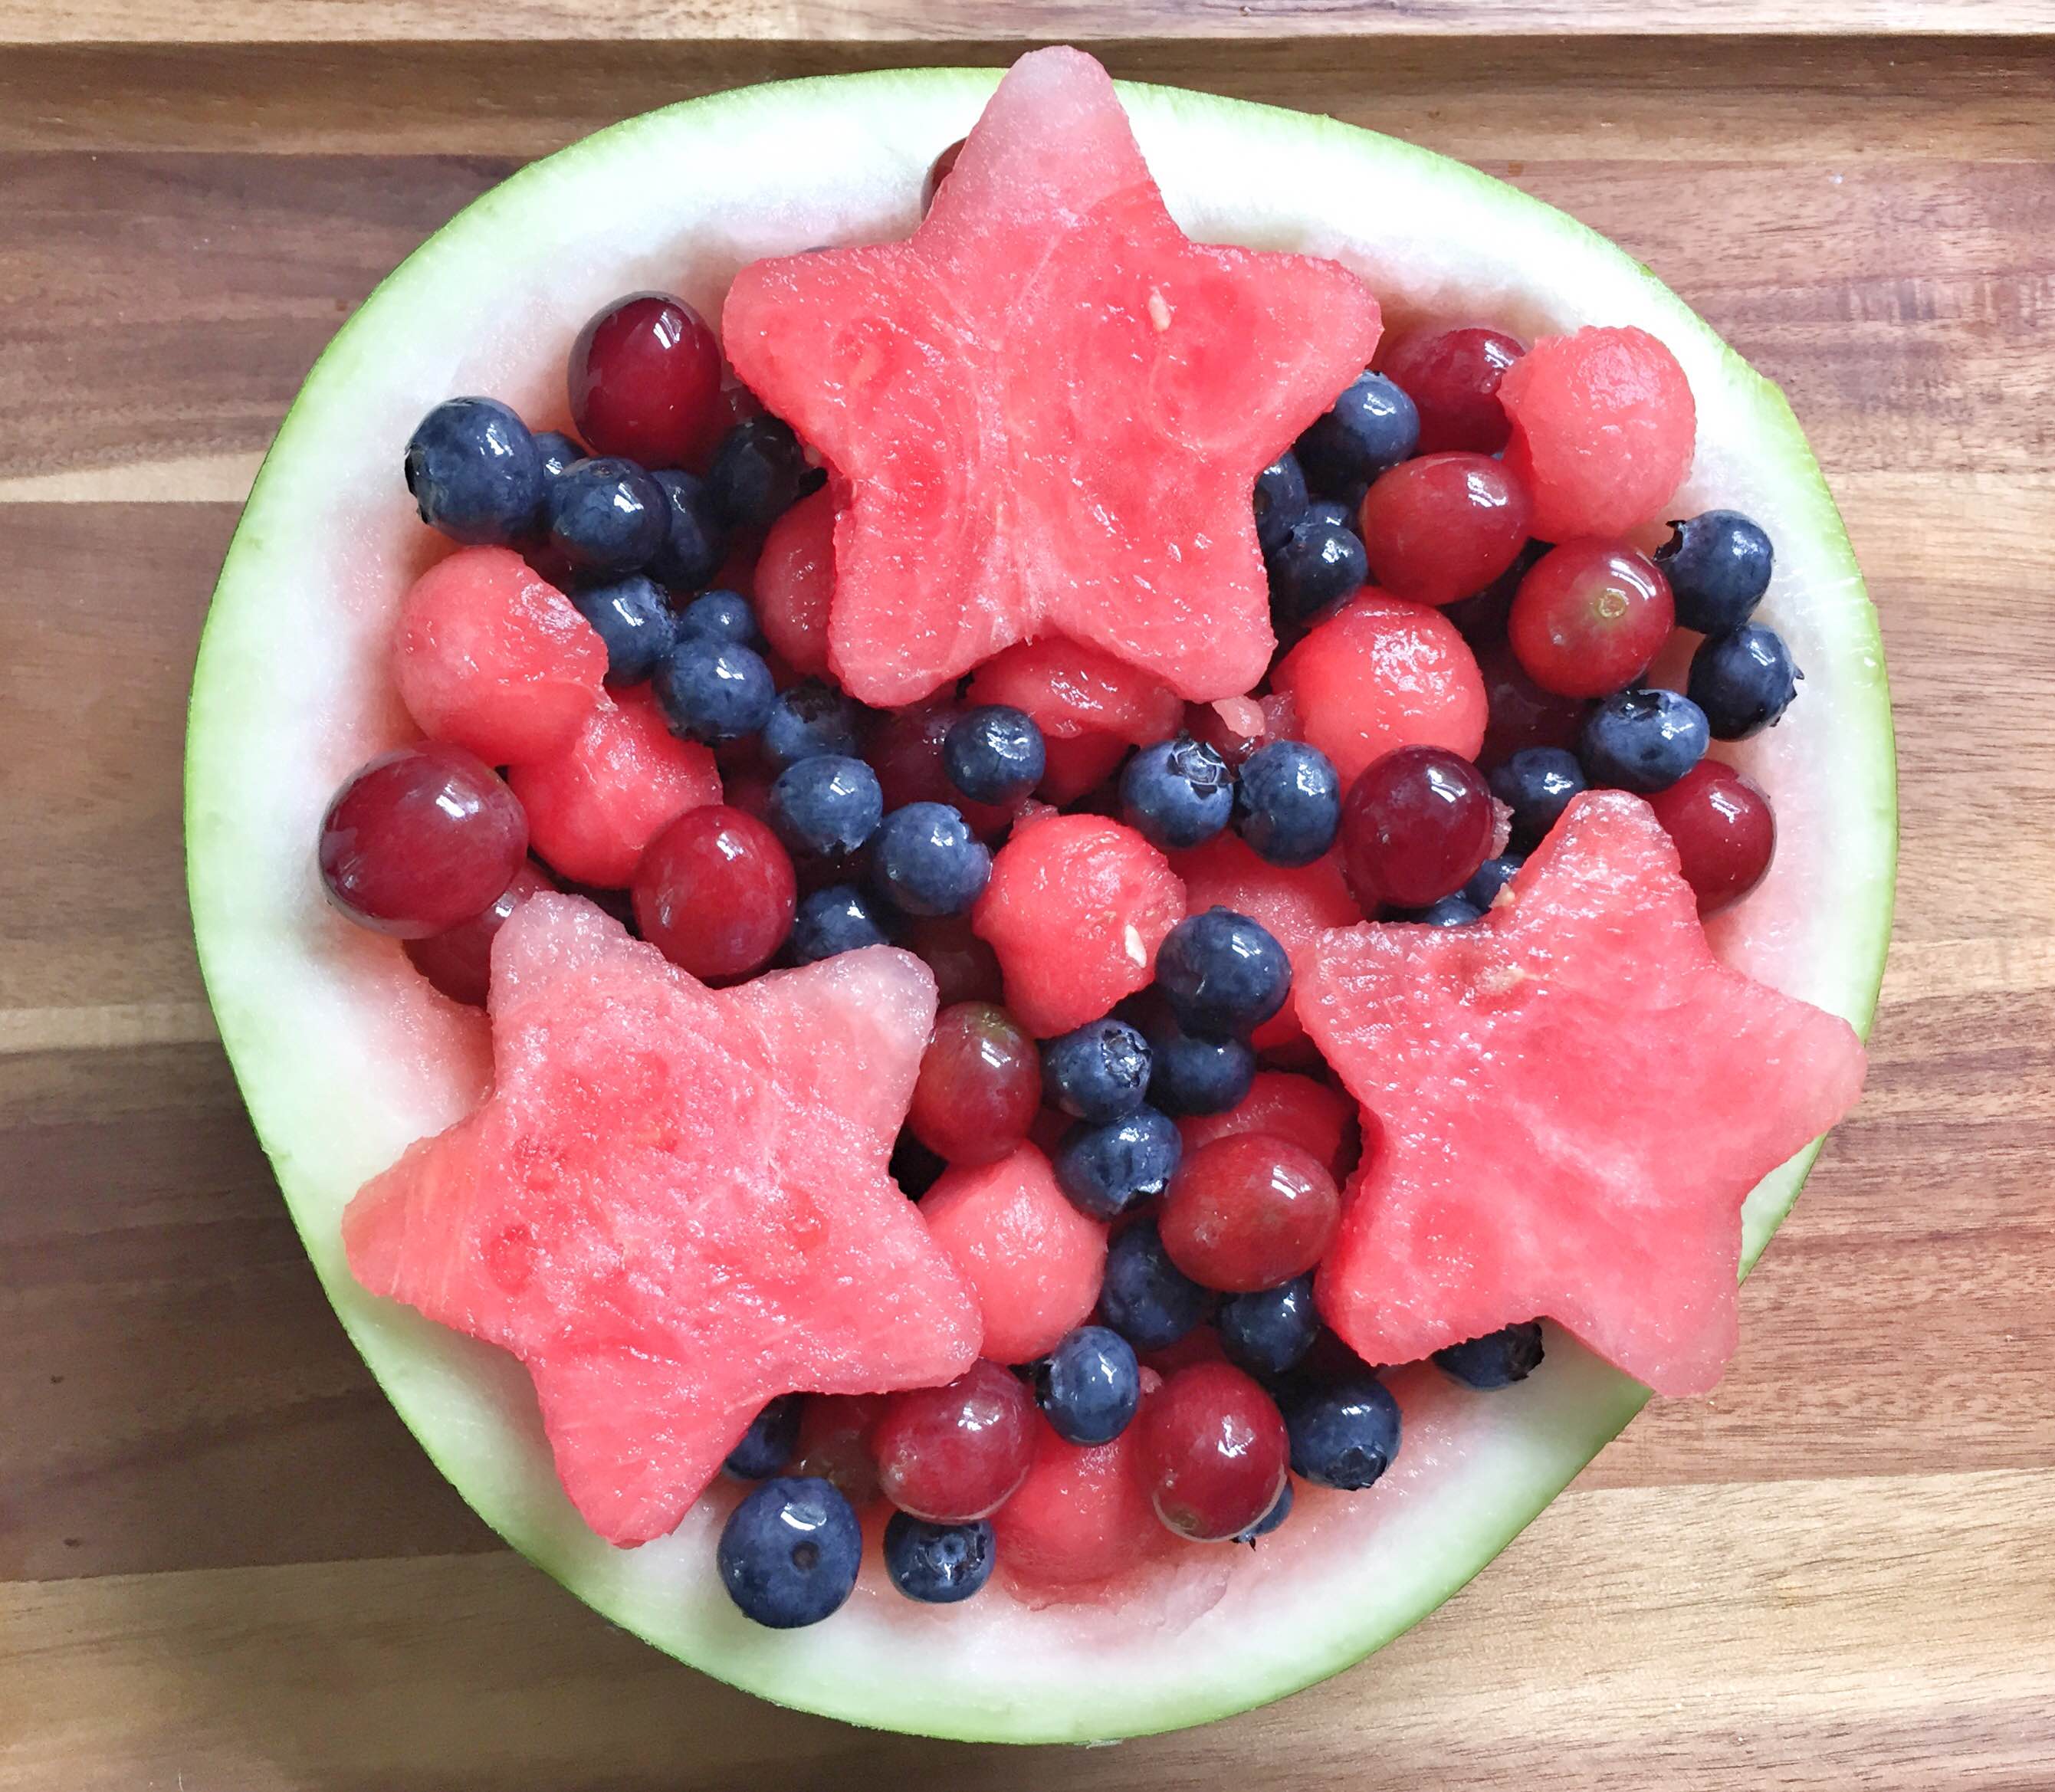 How to make a watermelon fruit bowl | 4th of July party fruit | 4th of July snack idea | How to make watermelon fruit salad GinaKirk.com @ginaekirk